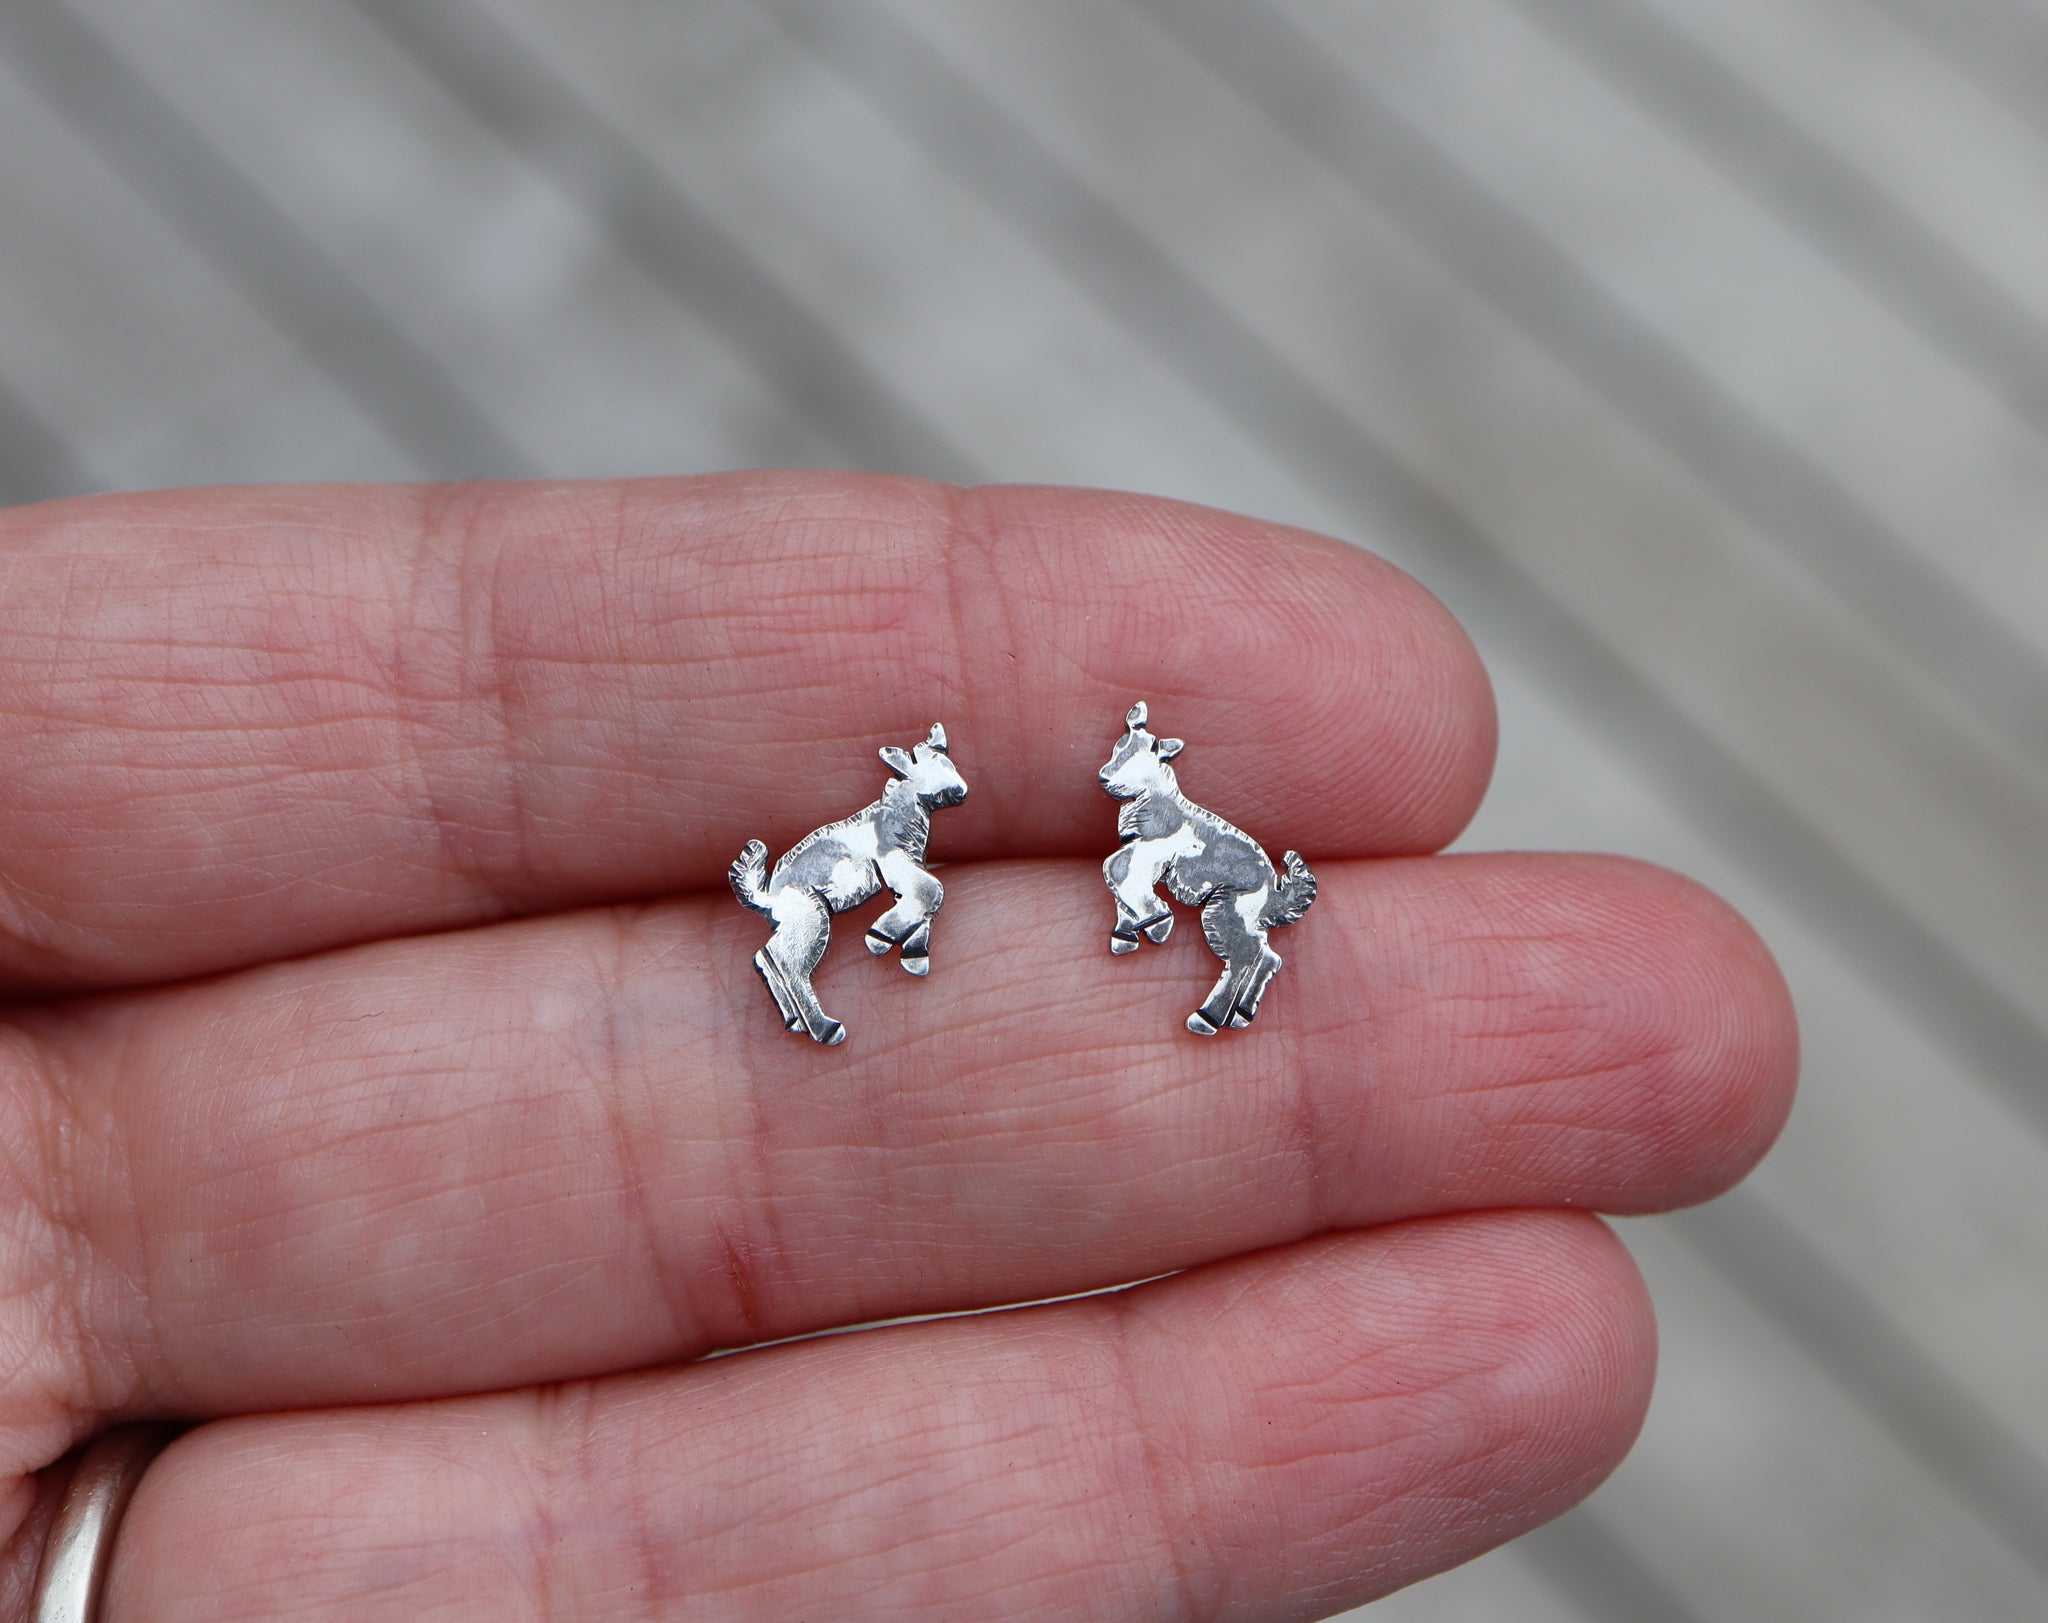 Small silver goat earrings that are kicking up into the air being silly. They have darkened spots on them so that they look black and white. A hand is shown holding them for size reference. 